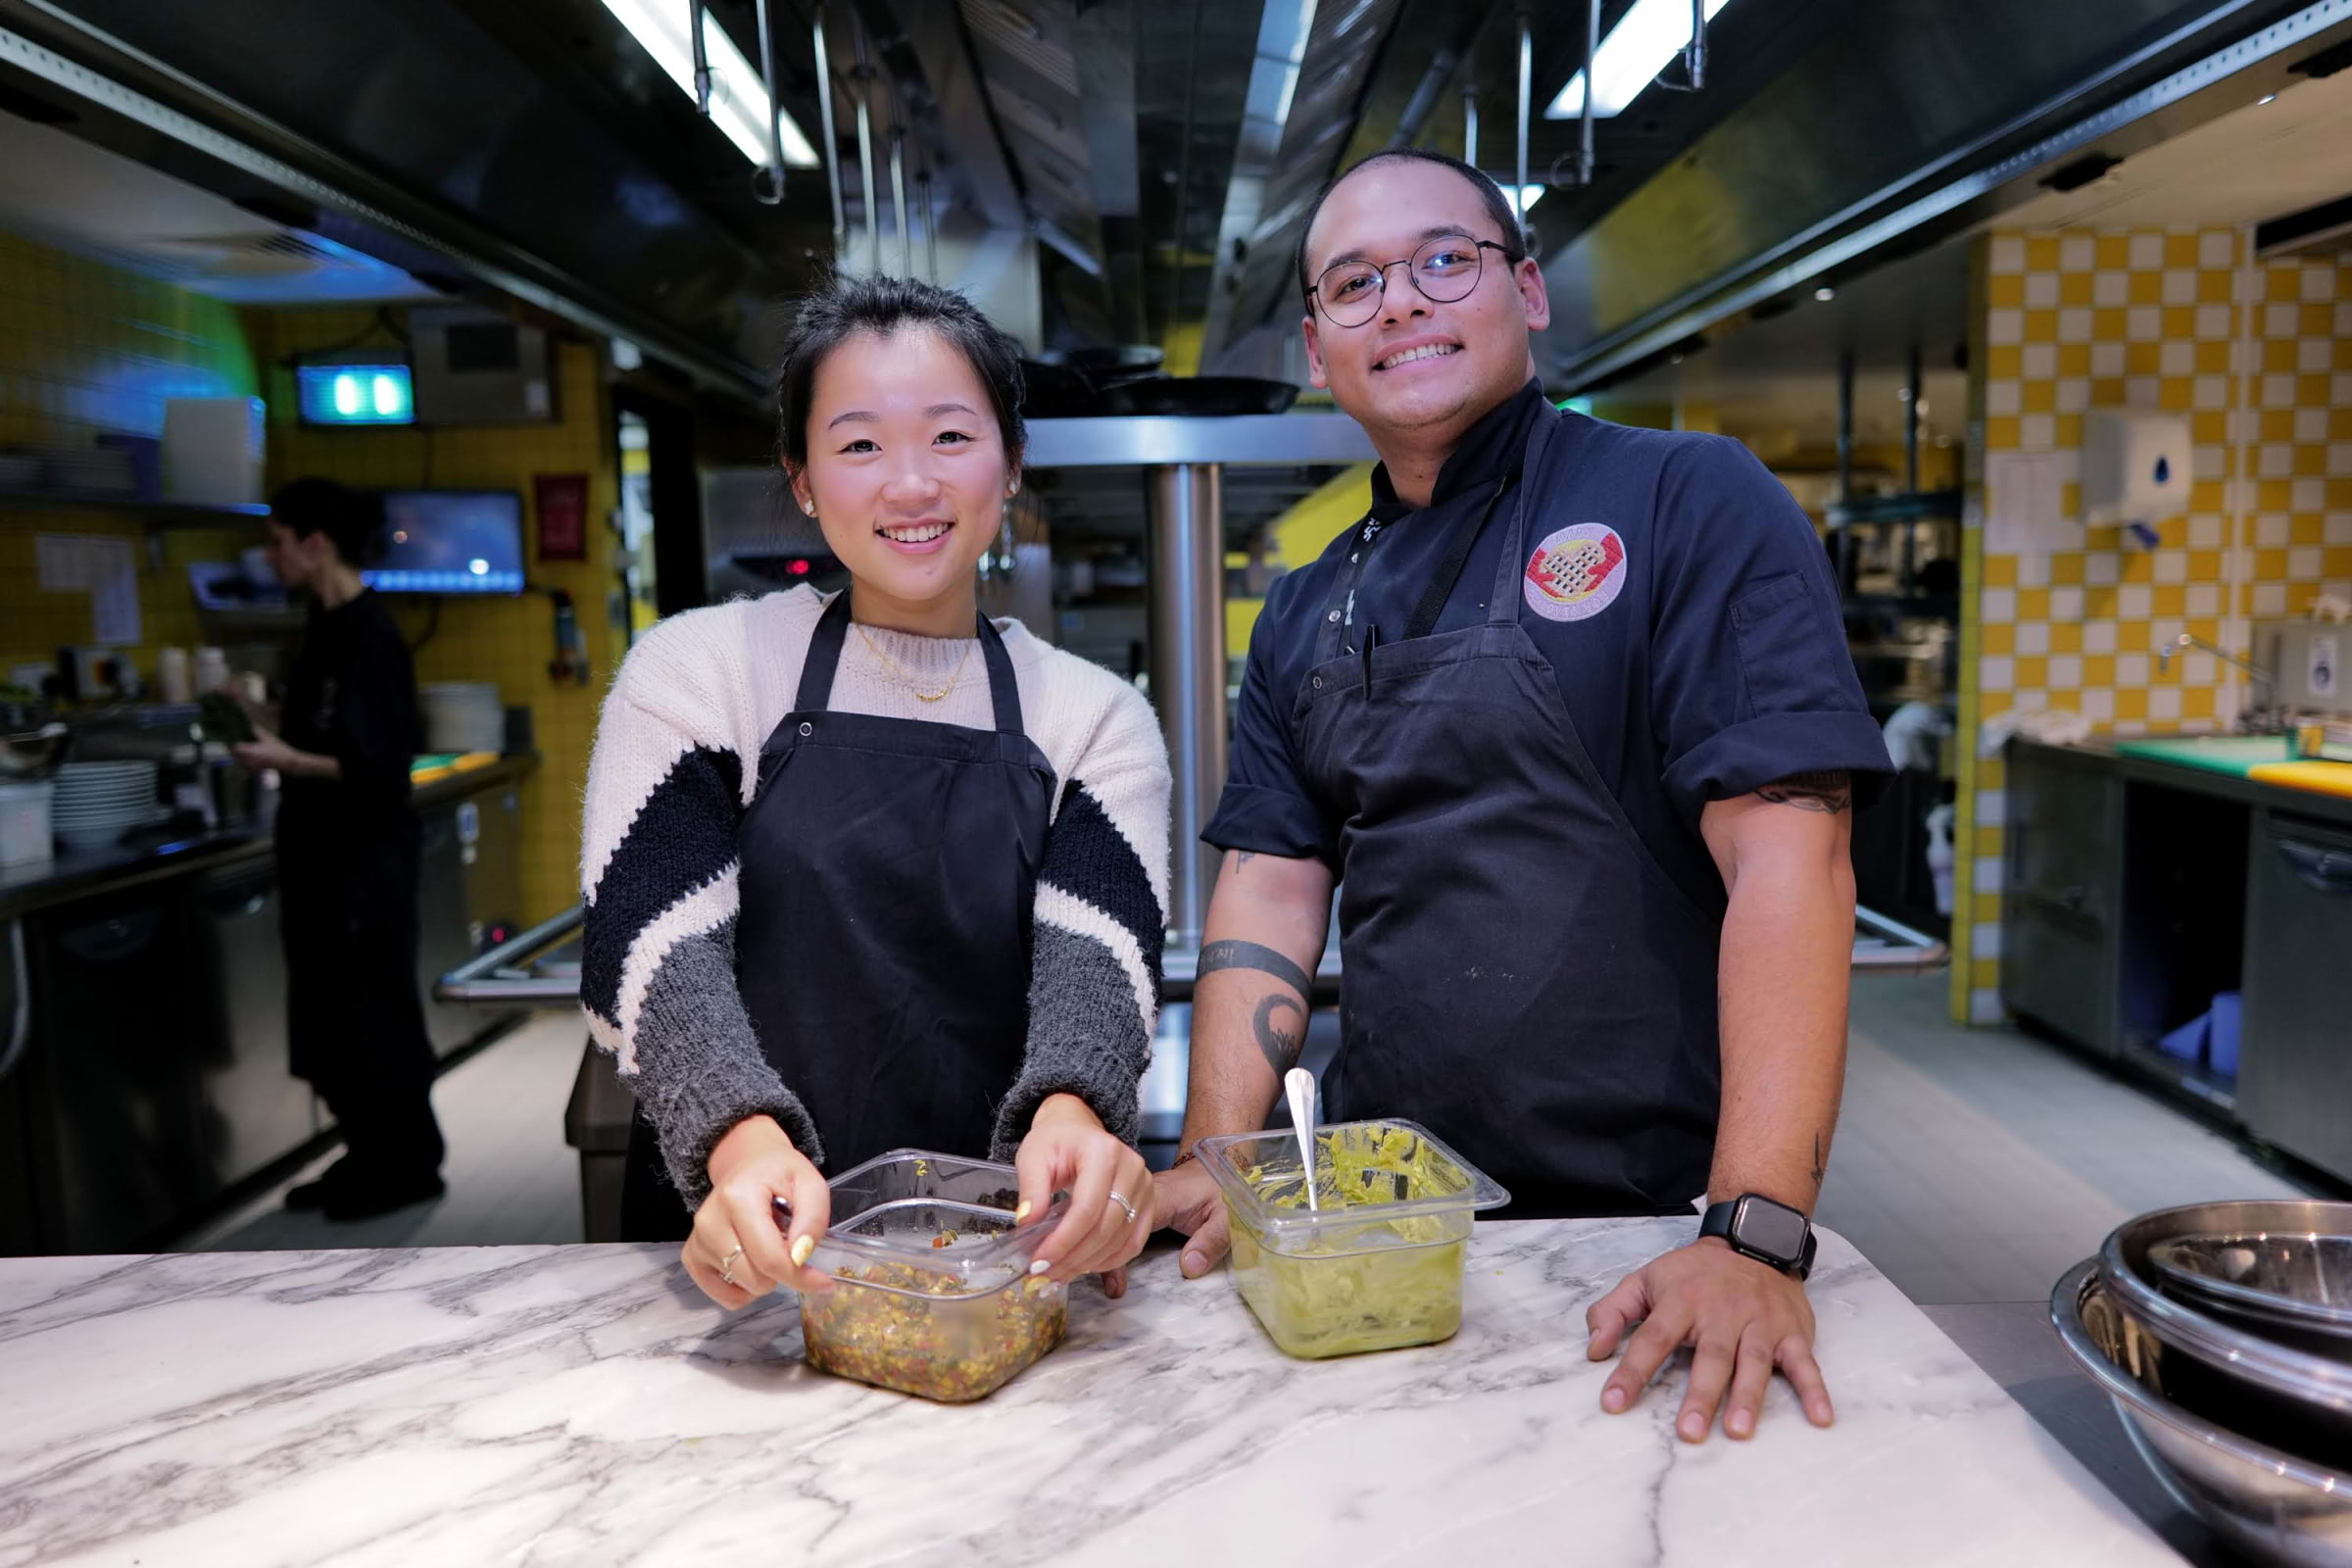 TikTok Sensation Verna Gao is serving up a feast at Mama Shelter this week